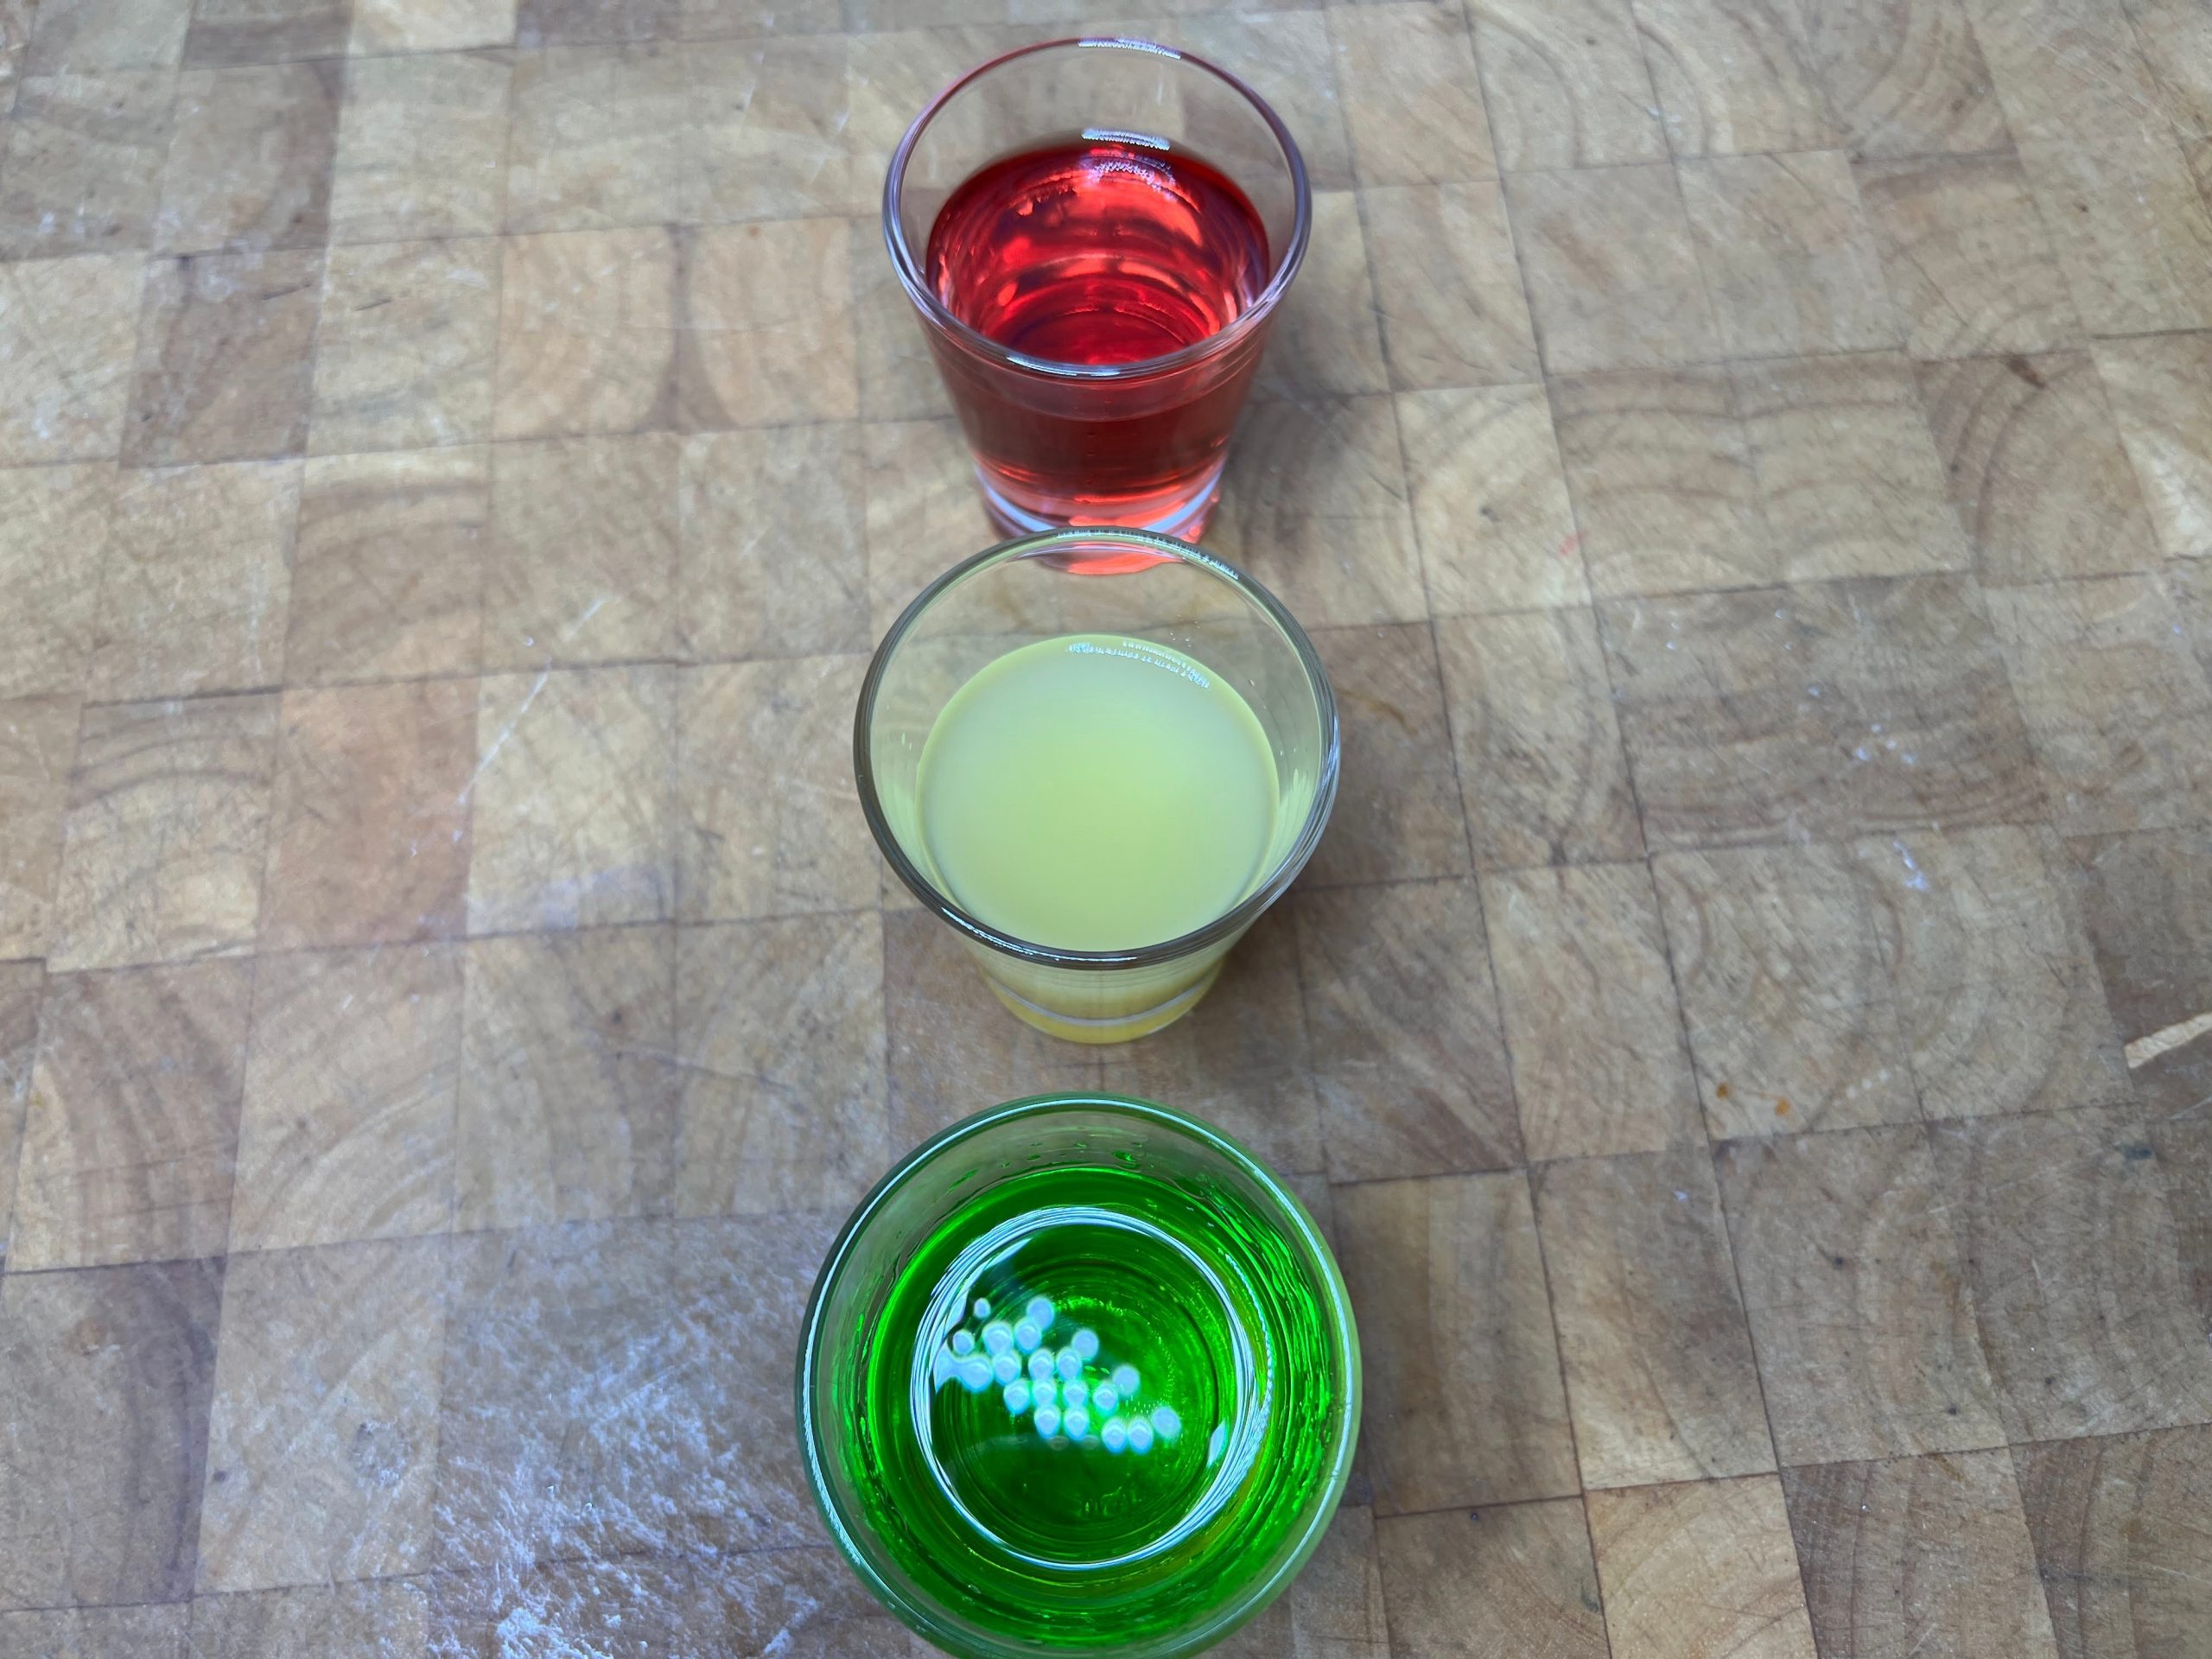 stop light shots: three shot glass with red, yellow and green colored shots on a wooden tabled